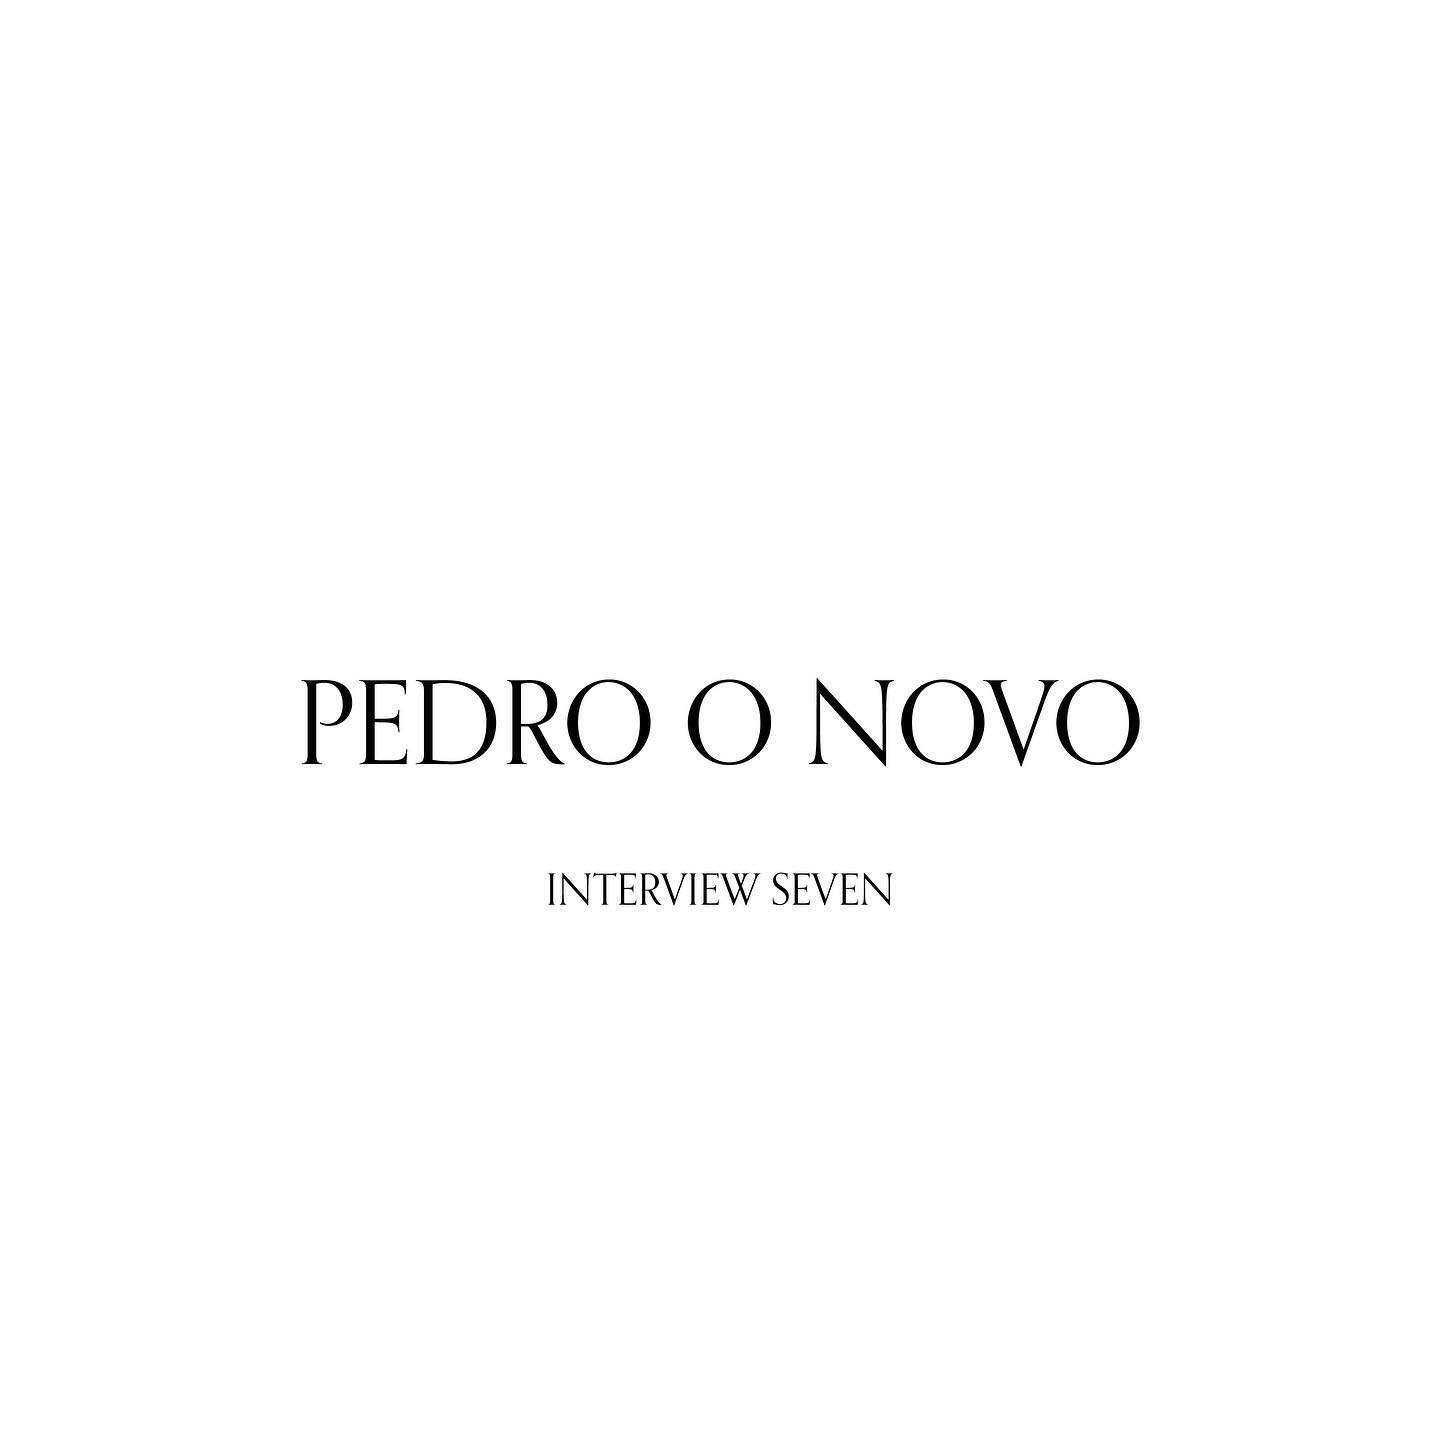 Plato is happy to present INTERVIEW SEVEN. For this seventh interview we focused on Pedro O Novo @pedro.o.novo 

Check the full interview, both in English and Portuguese, in our website (link in BIO).